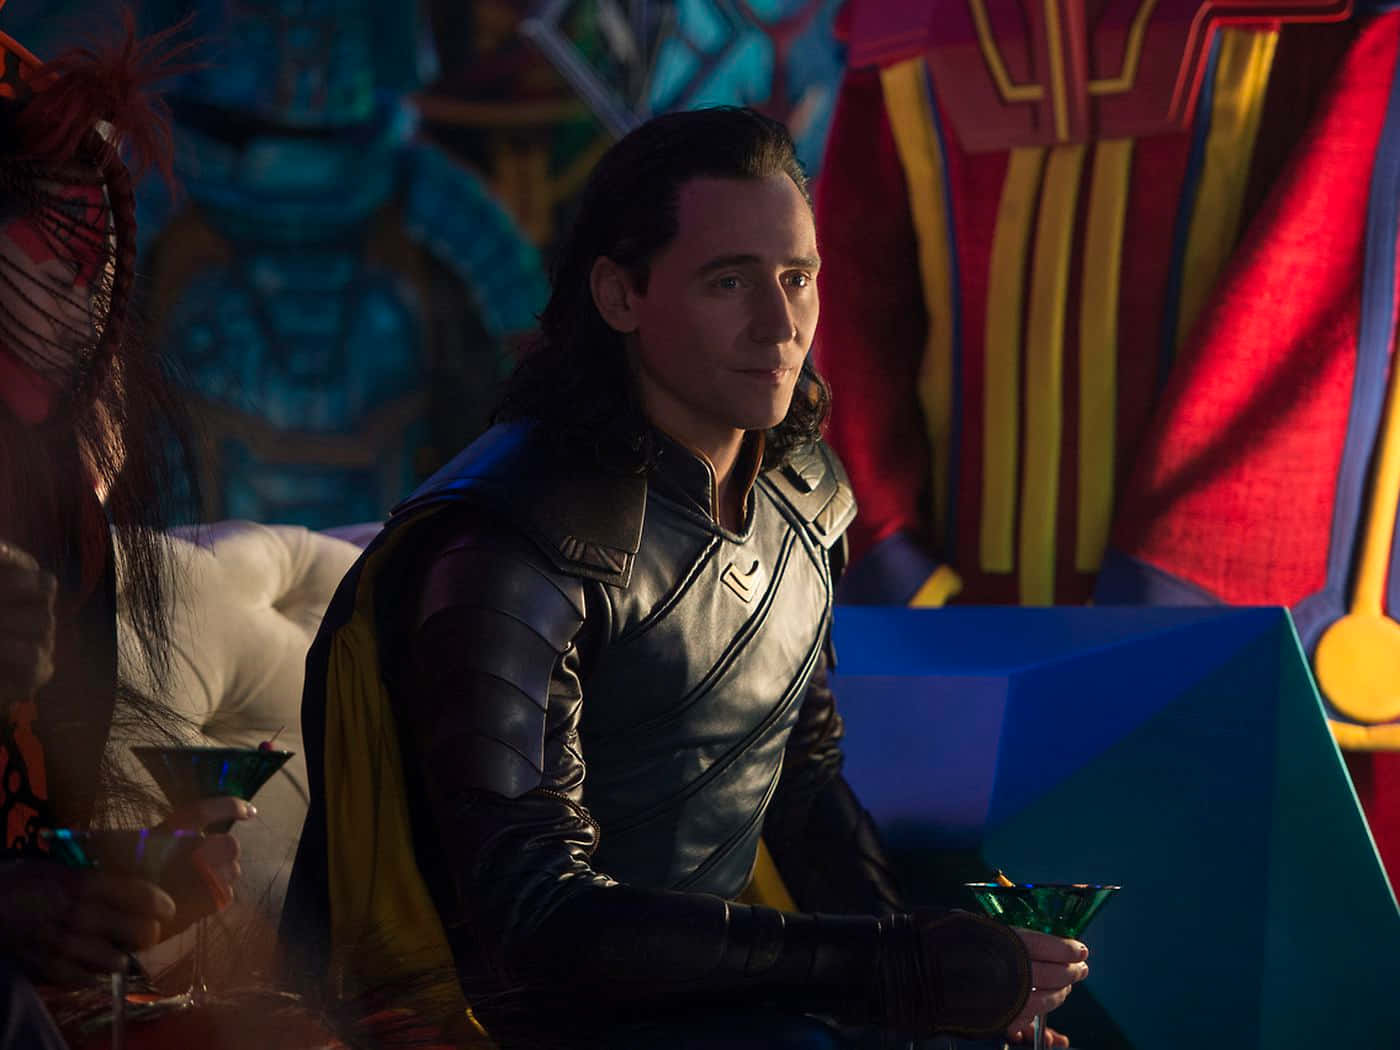 Loki, The God of Mischief, standing tall and intense in the mystical land of Asgard